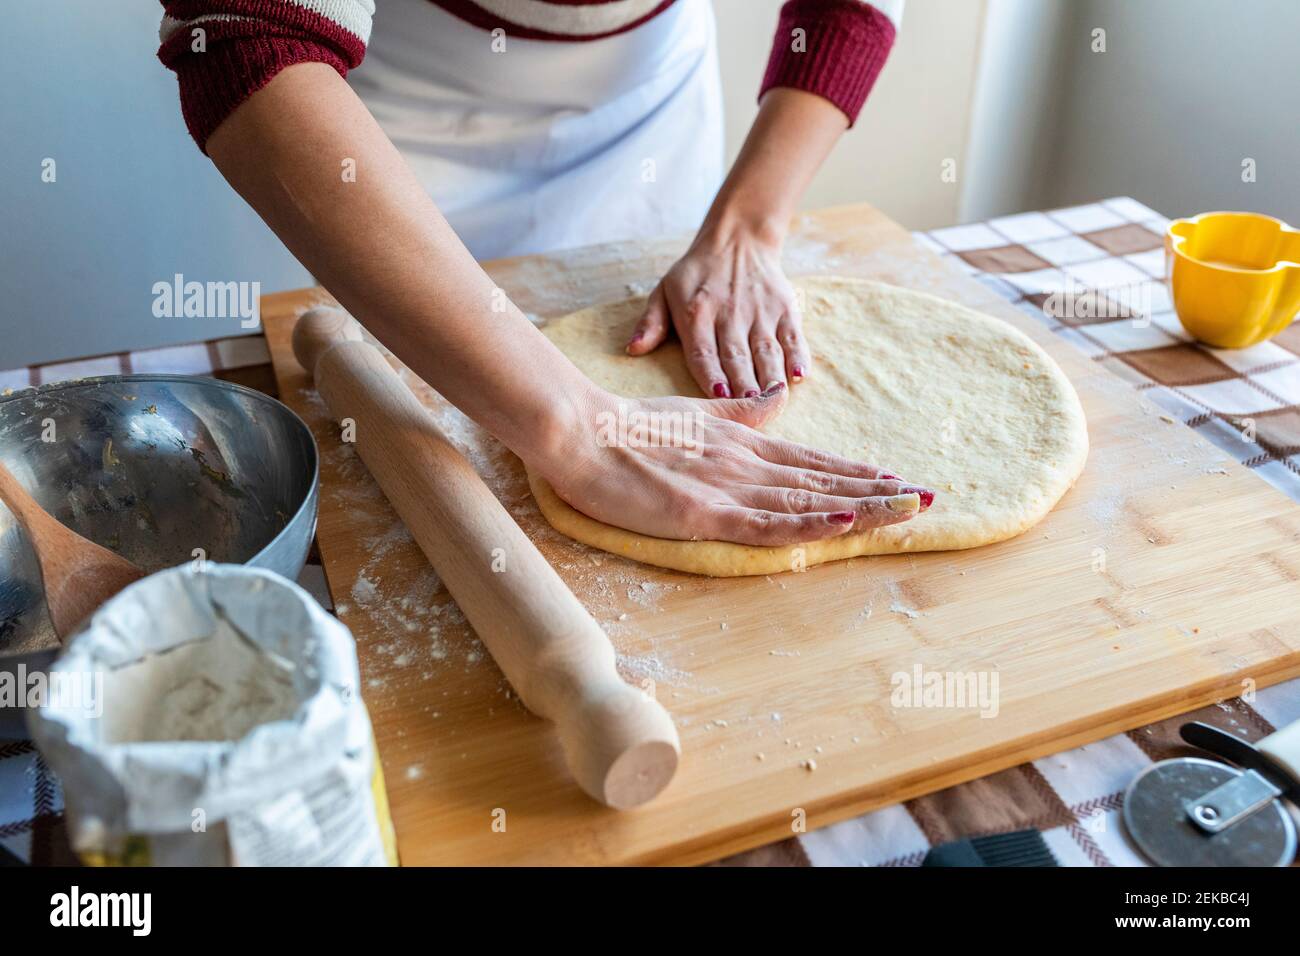 Woman flattening dough on cutting board with hands to make croissants in kitchen Stock Photo